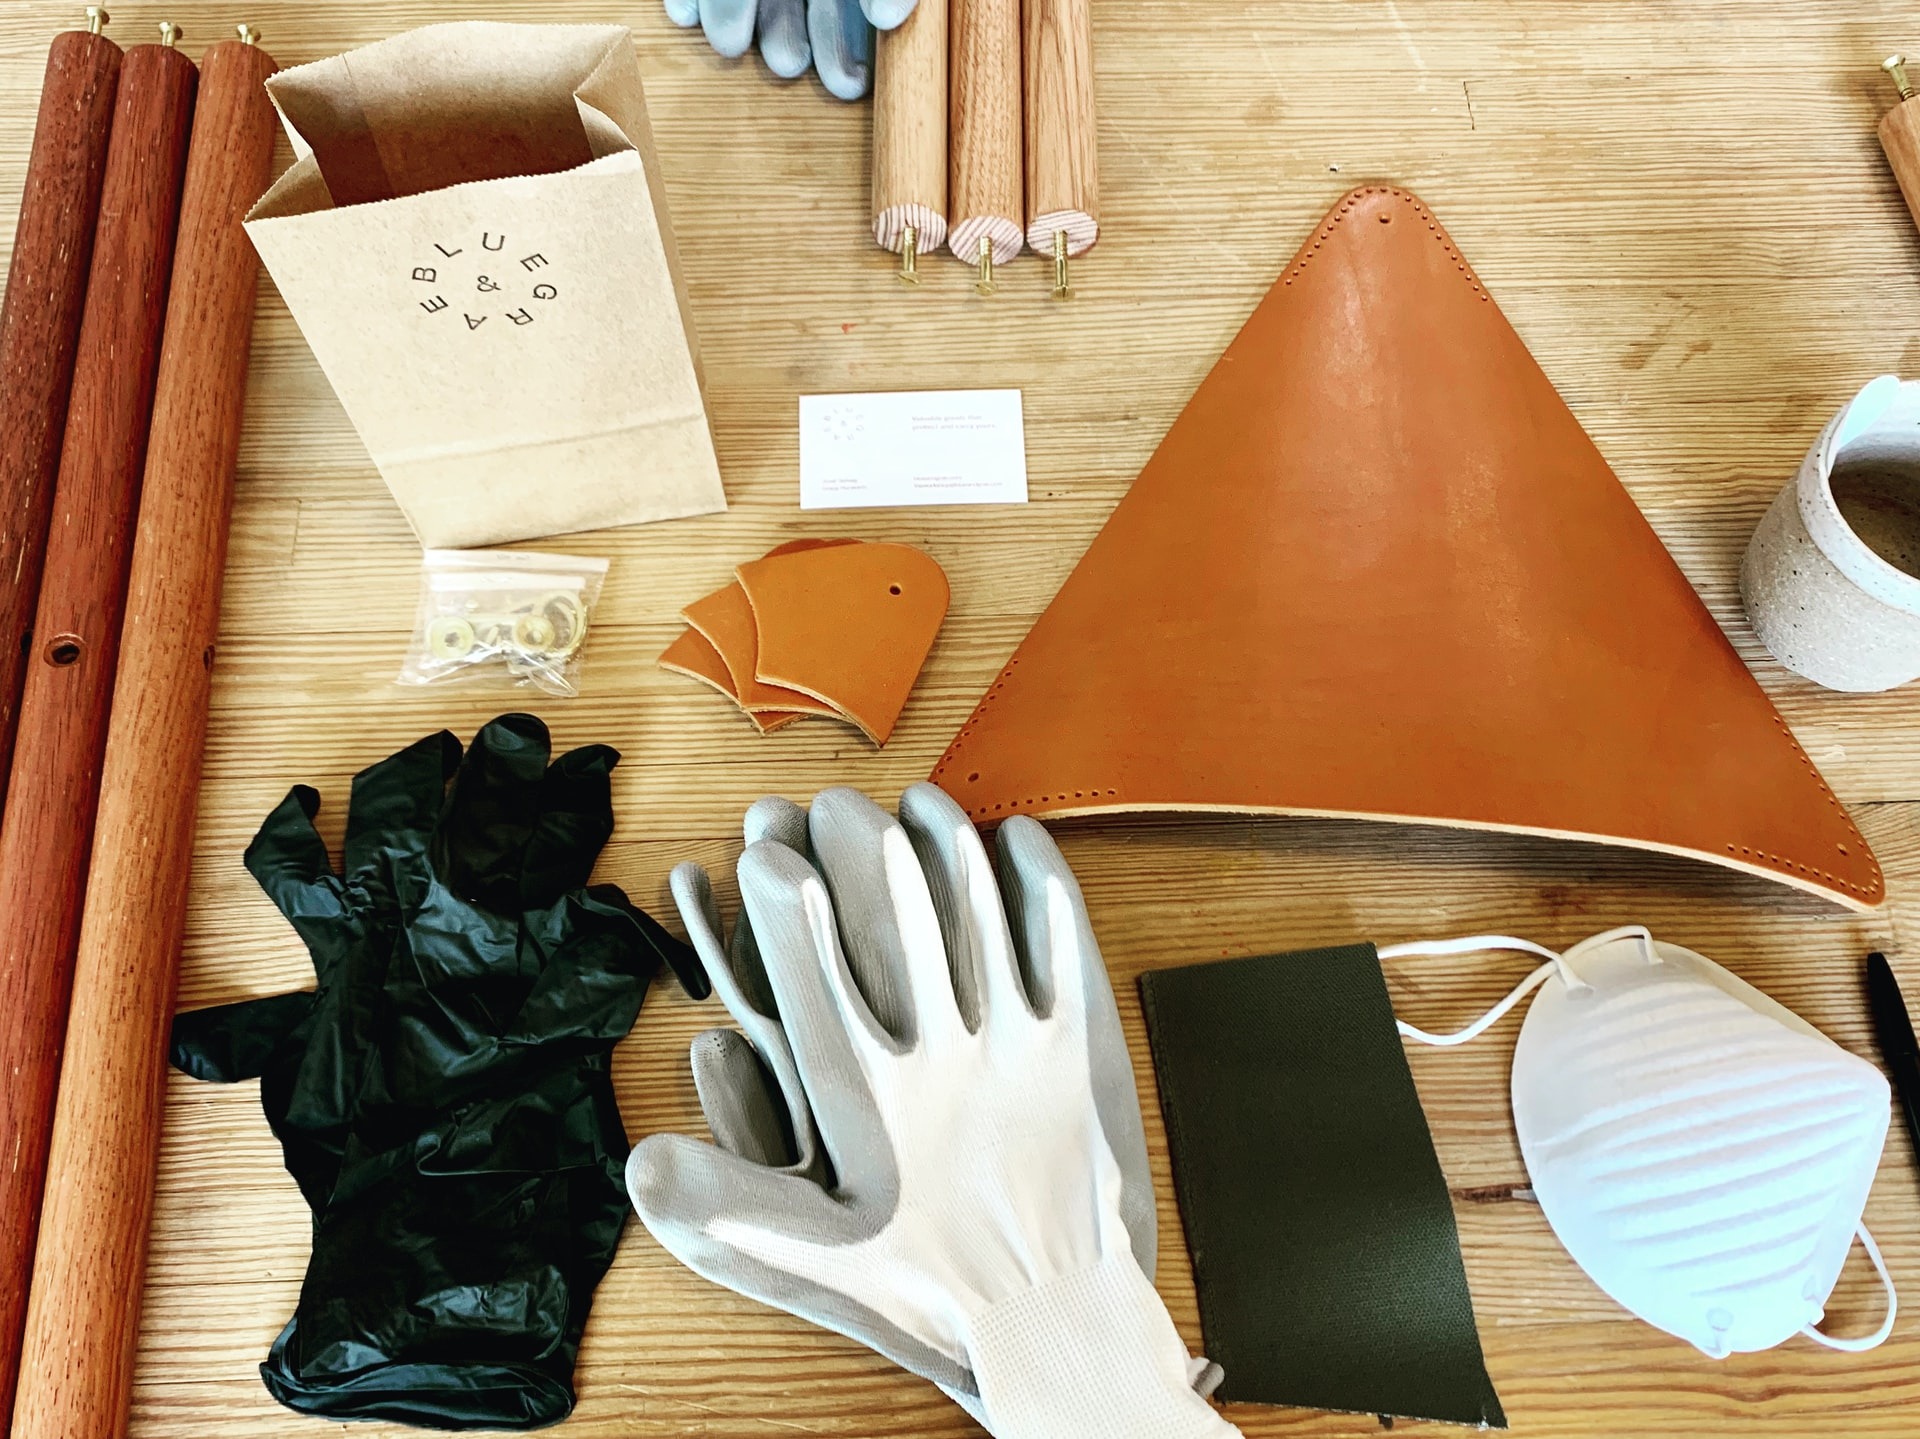 Learn about artisanal leather goods